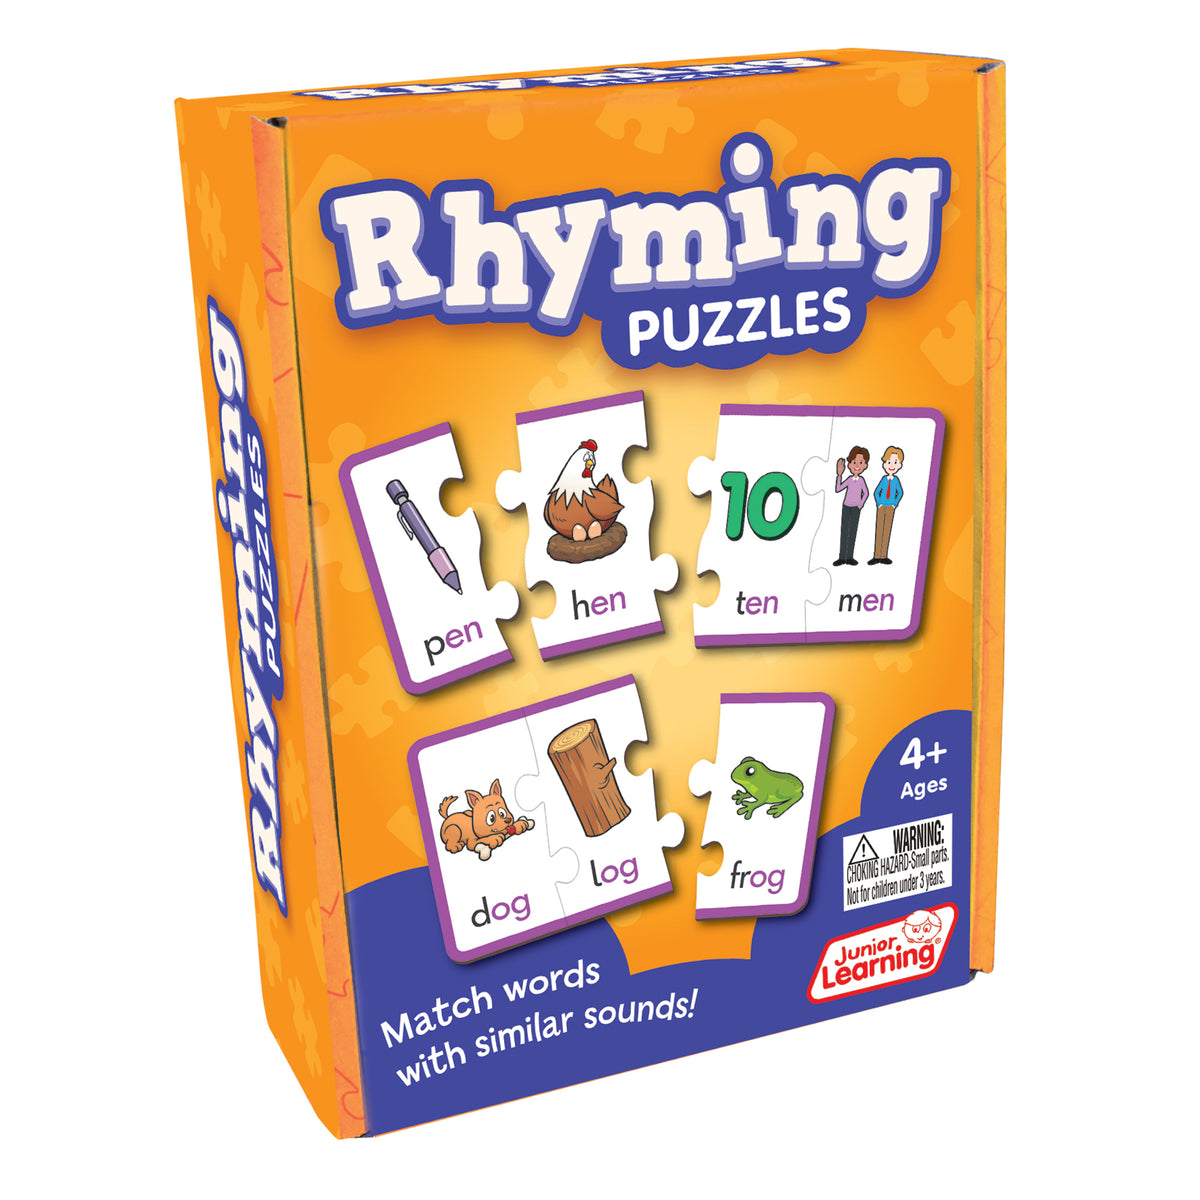 Junior Learning JL656 Rhyming Puzzles box angled right